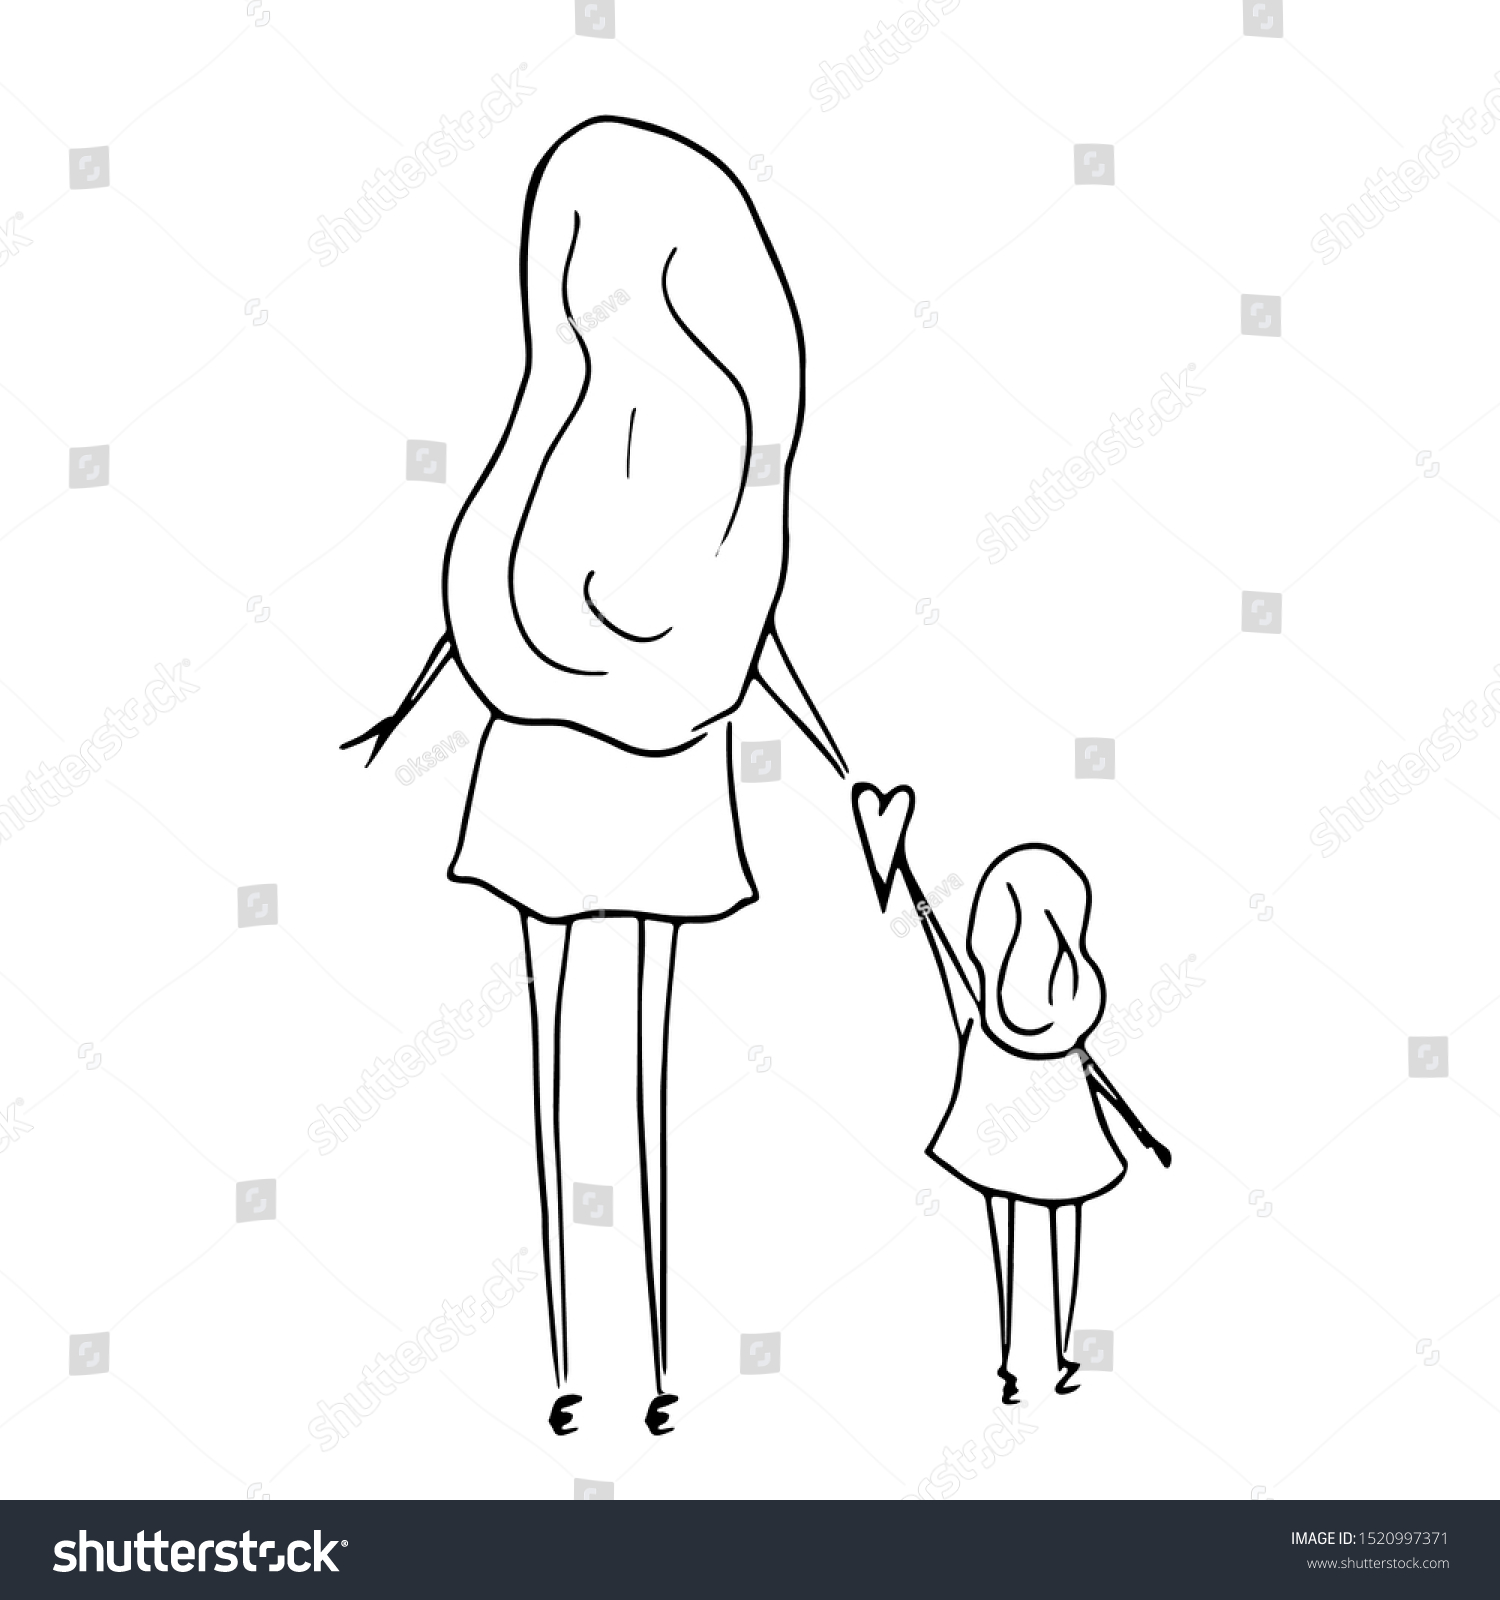 Mother Daughter Holding Hands Line Drawing Stock Vector Royalty Free